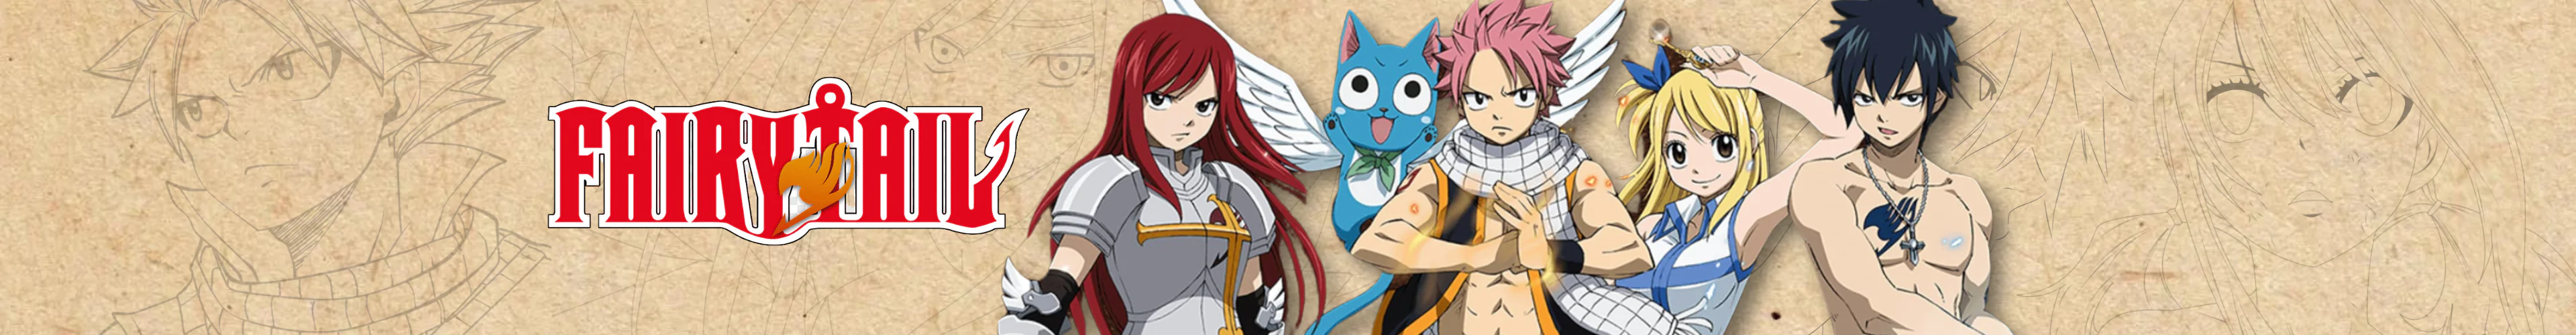 Fairy Tail t-shirts banner